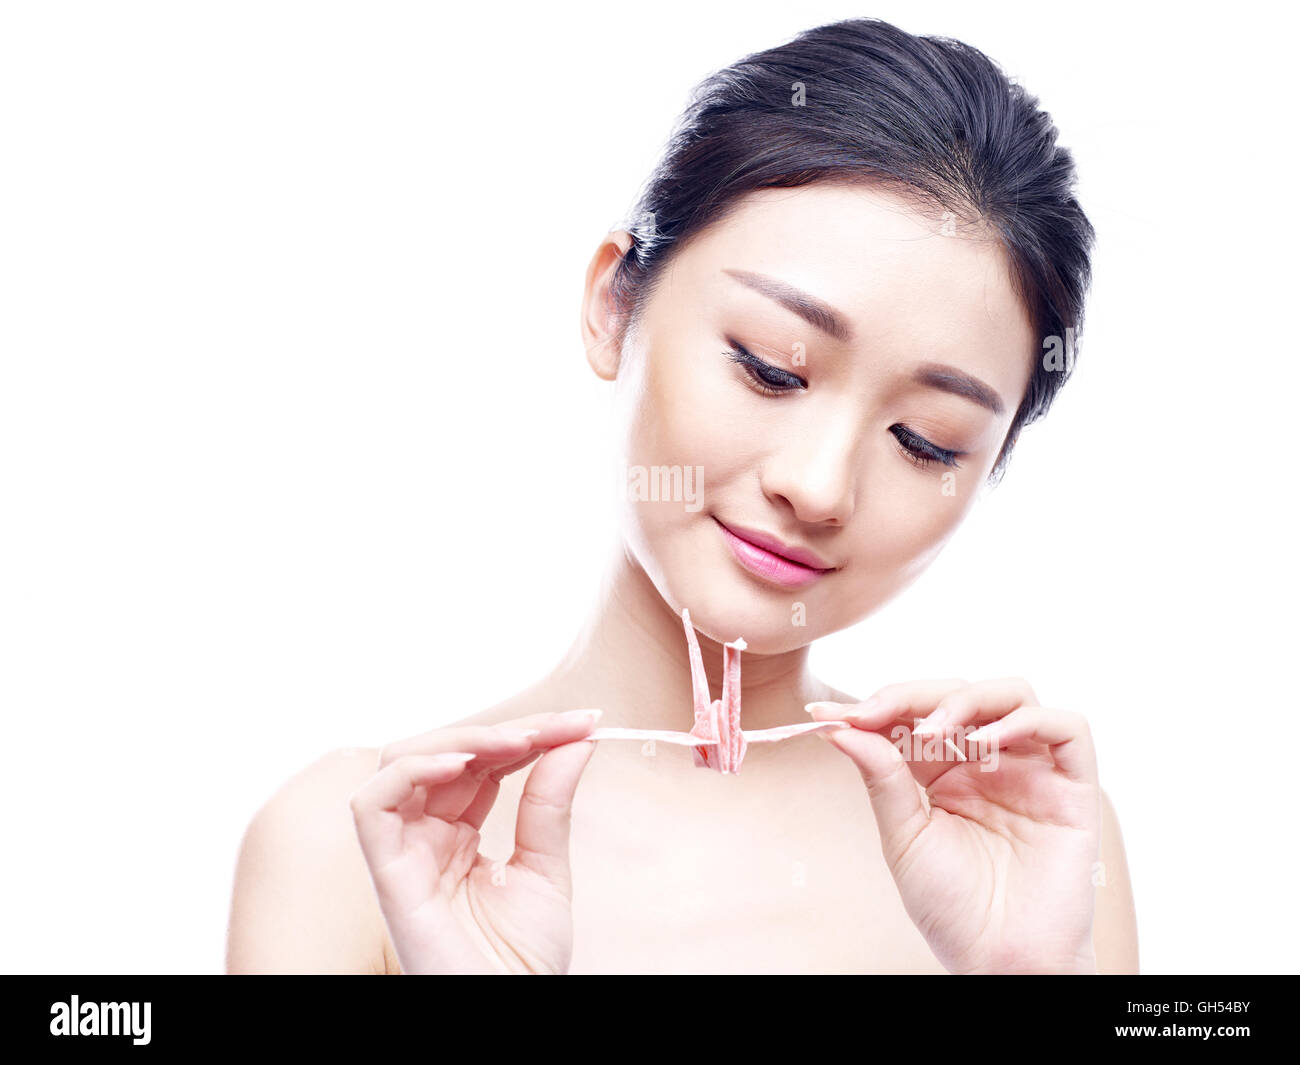 young asian woman holding and looking at a paper crane, isolated on white background. Stock Photo